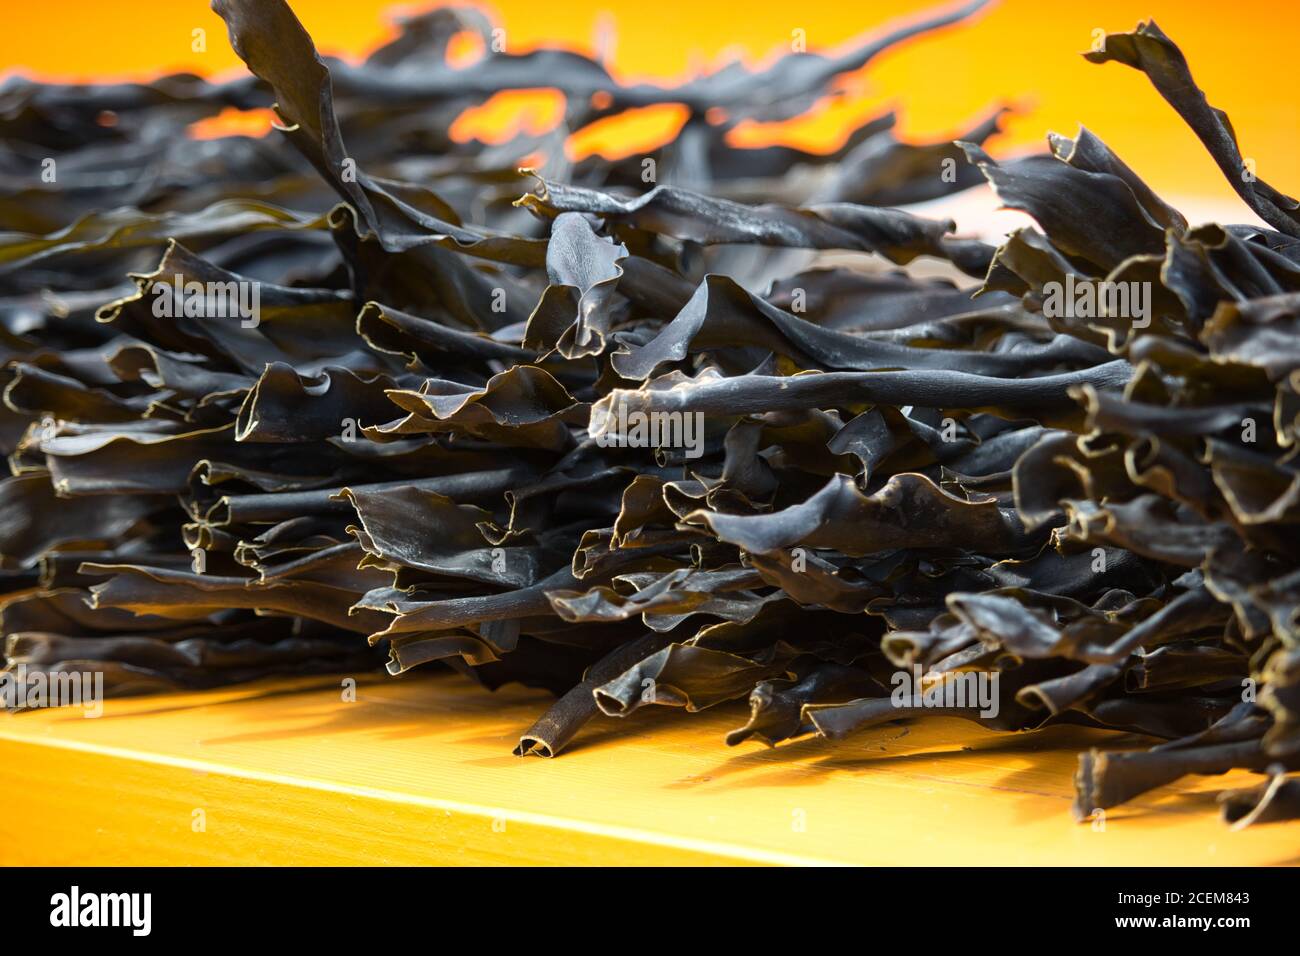 Loose, dry kombu kelp seaweed unwrapped and neatly stacked on an orange table / background Stock Photo